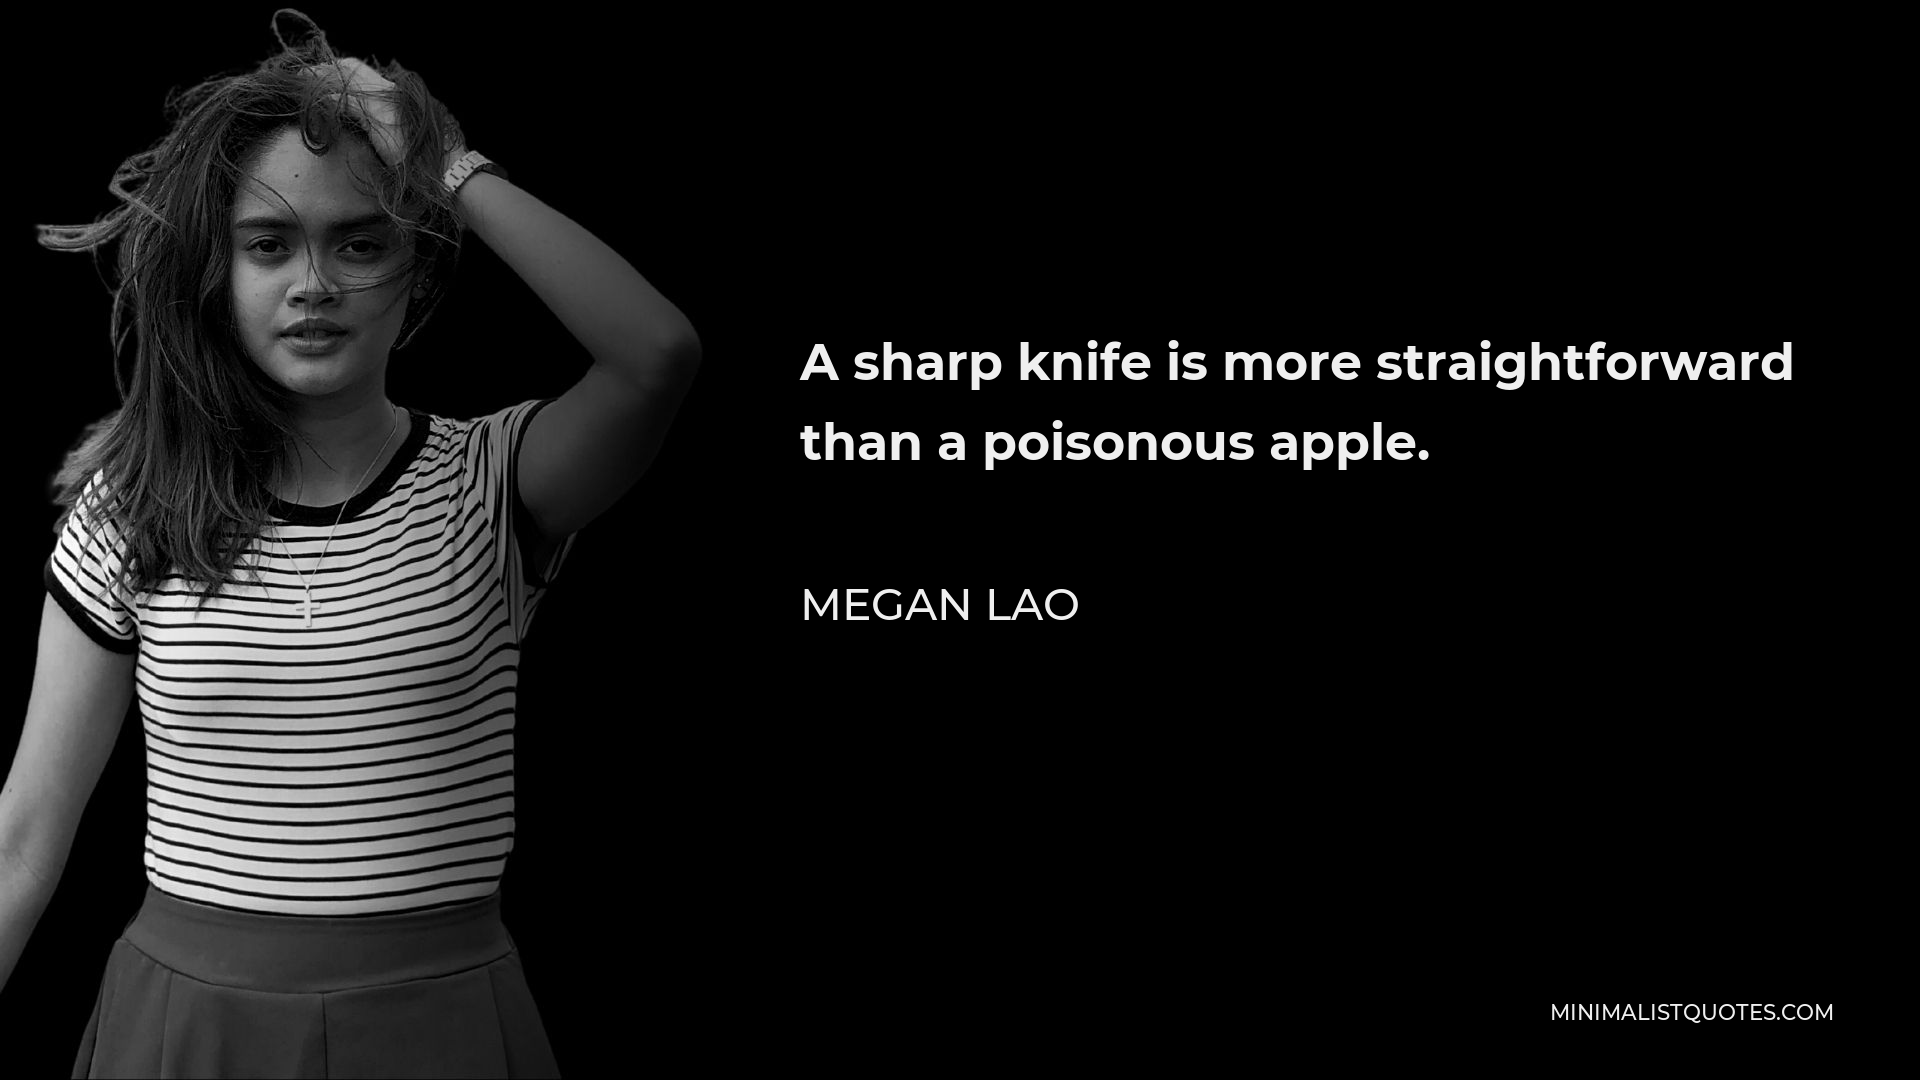 Megan Lao Quote - A sharp knife is more straightforward than a poisonous apple.